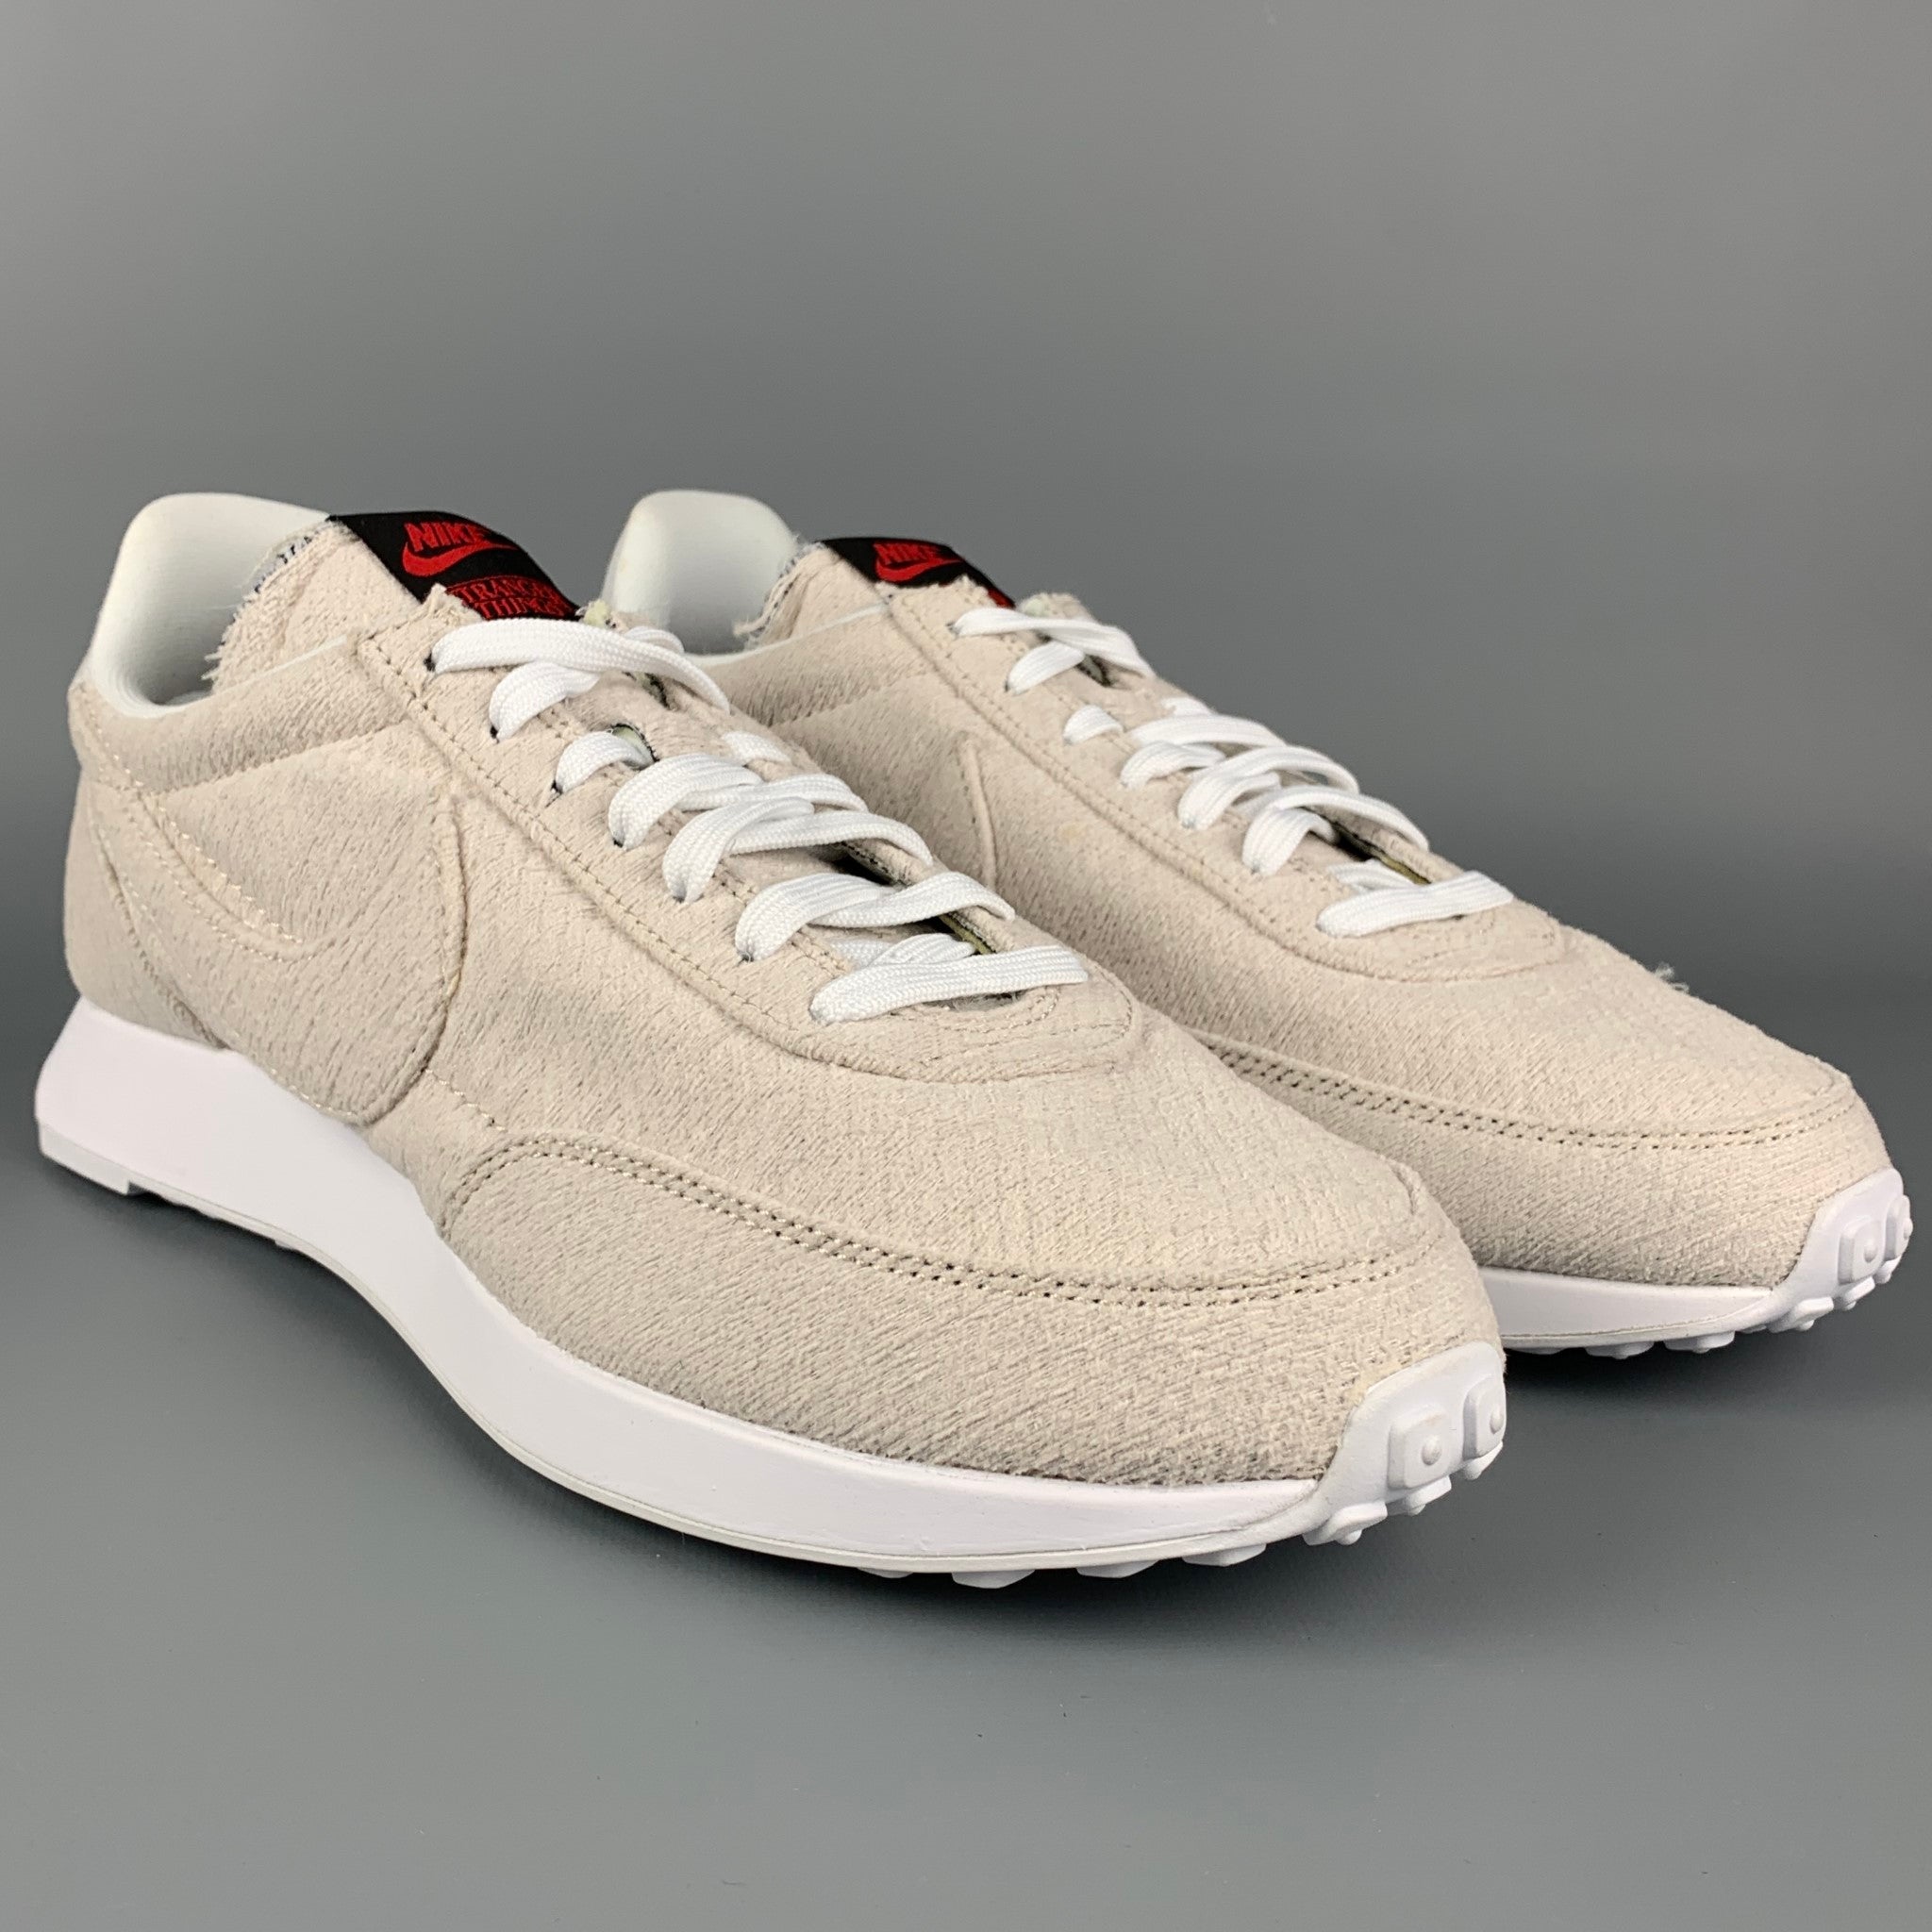 NIKE Air Tailwind QS UD x Stranger Things Size 10 Beige Cotton ...